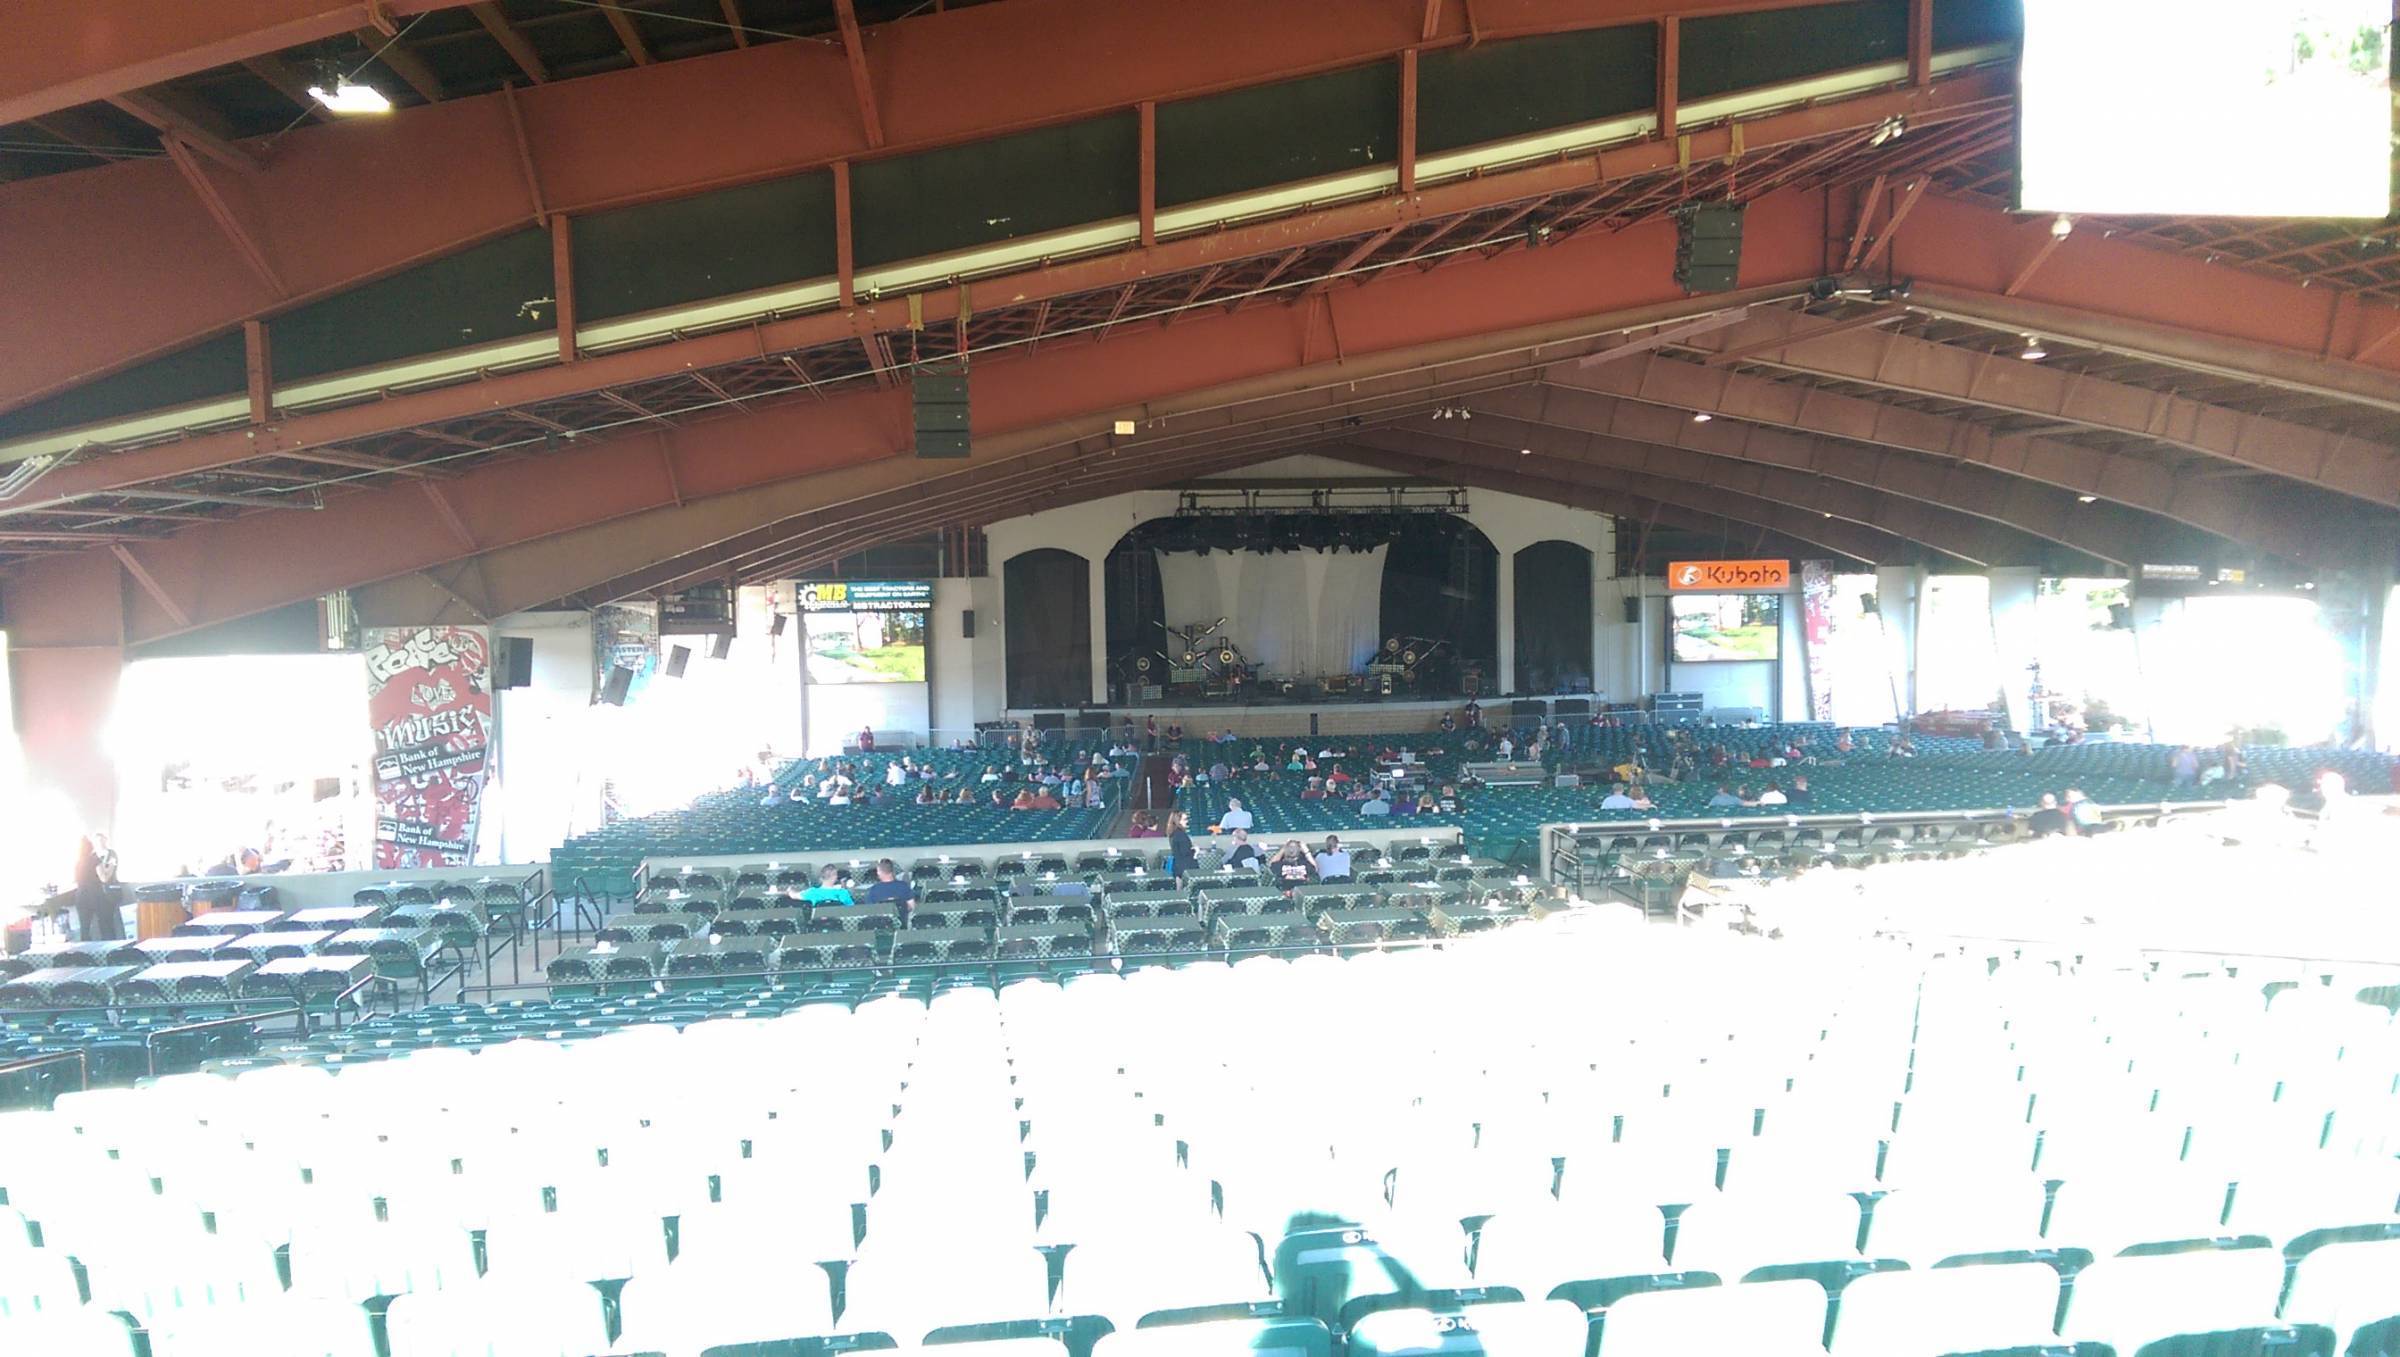 section 3b, row 20 seat view  - bank of new hampshire pavilion